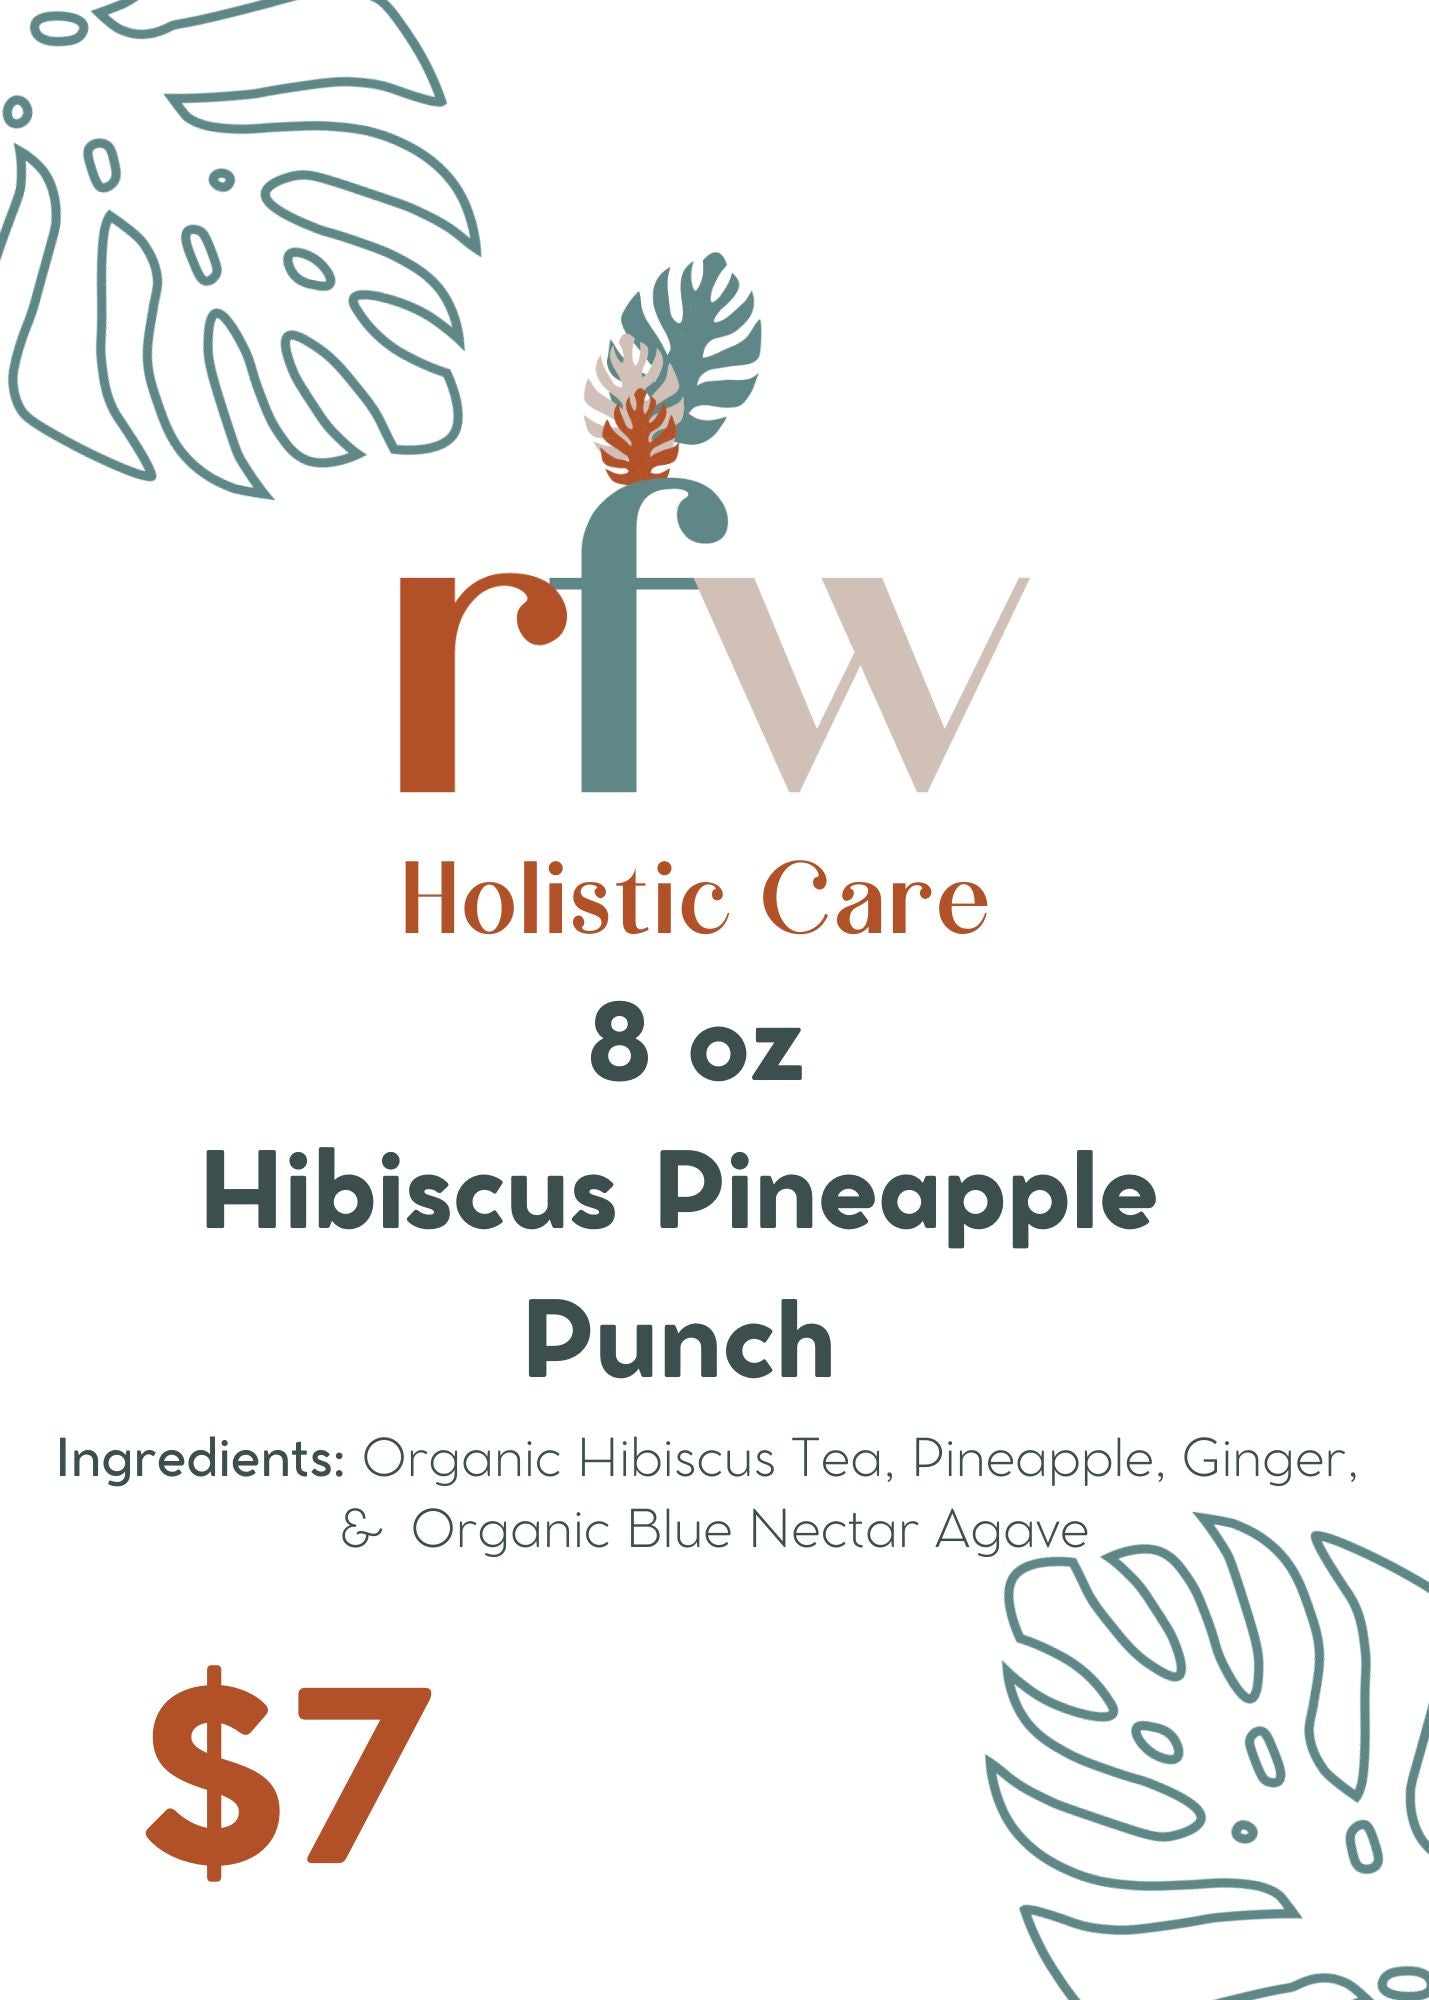 Hibiscus Pineapple Punch